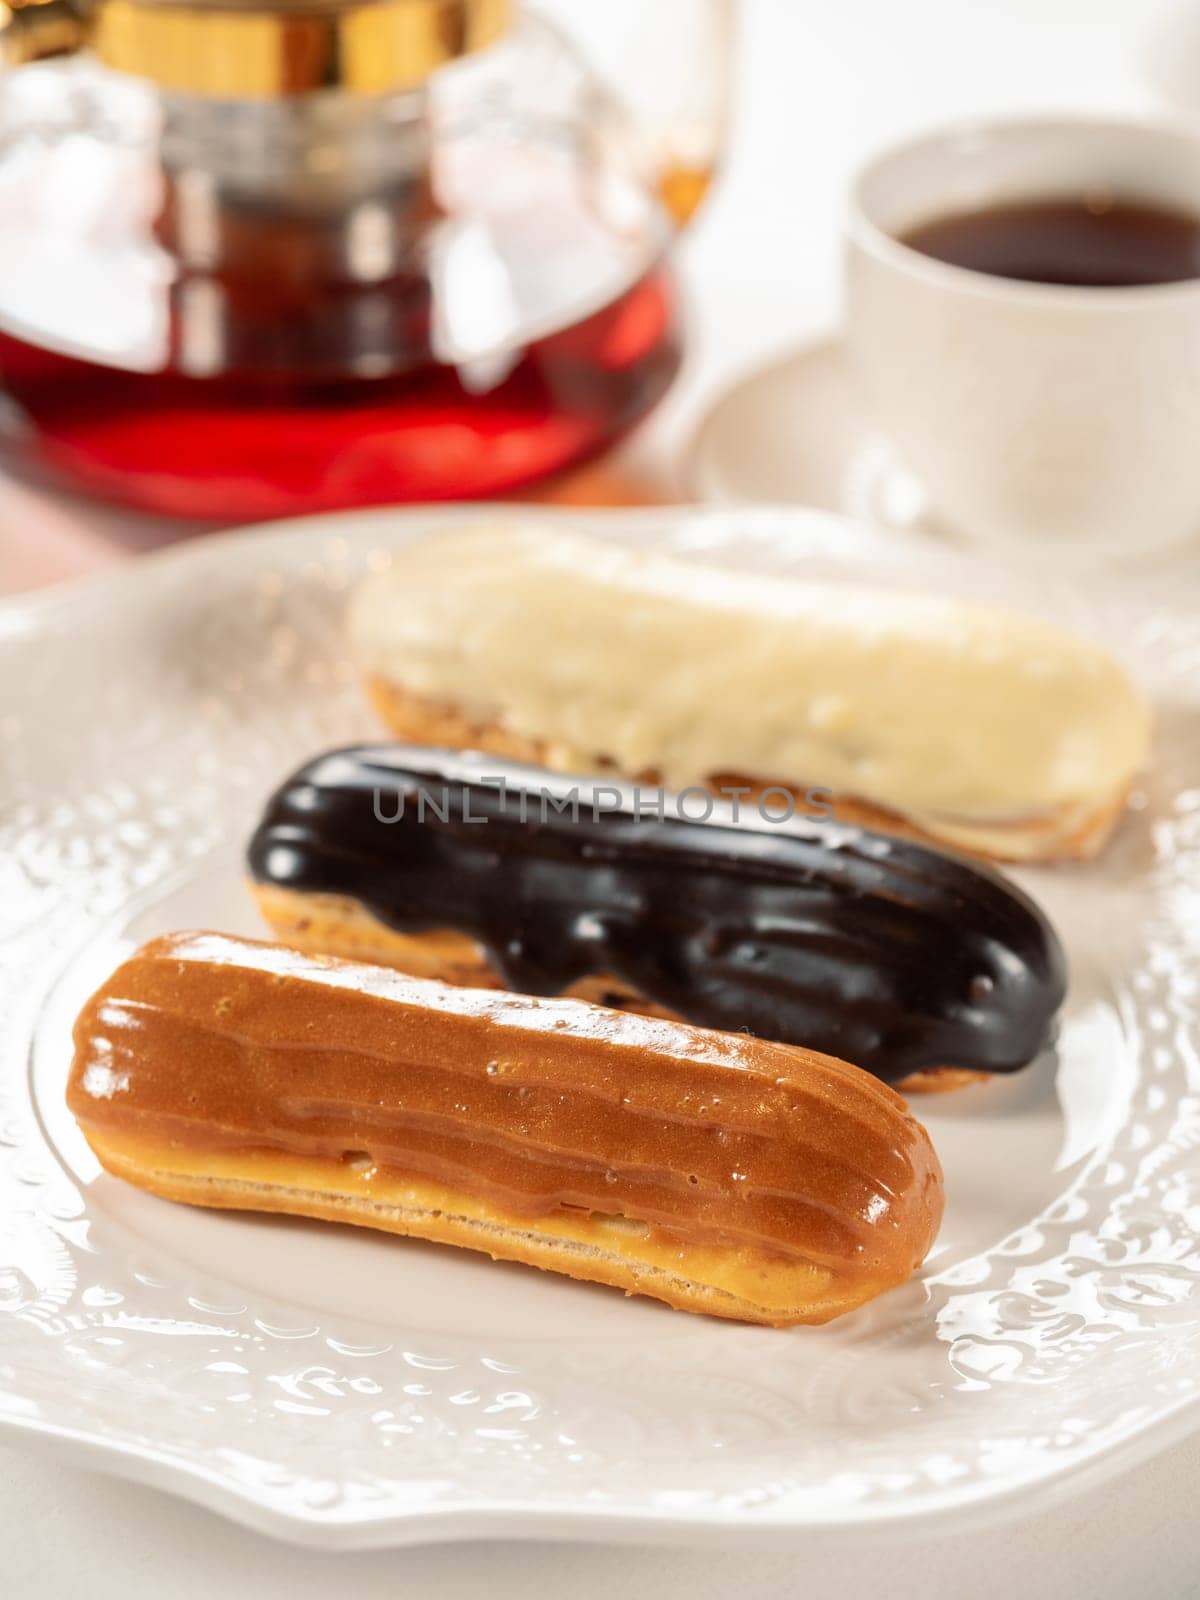 Group of french dessert Eclair on white plate. Caramel, chocolate and vanilla glazed eclairs on white plate in restaurant table background. Perfect french eclairs set